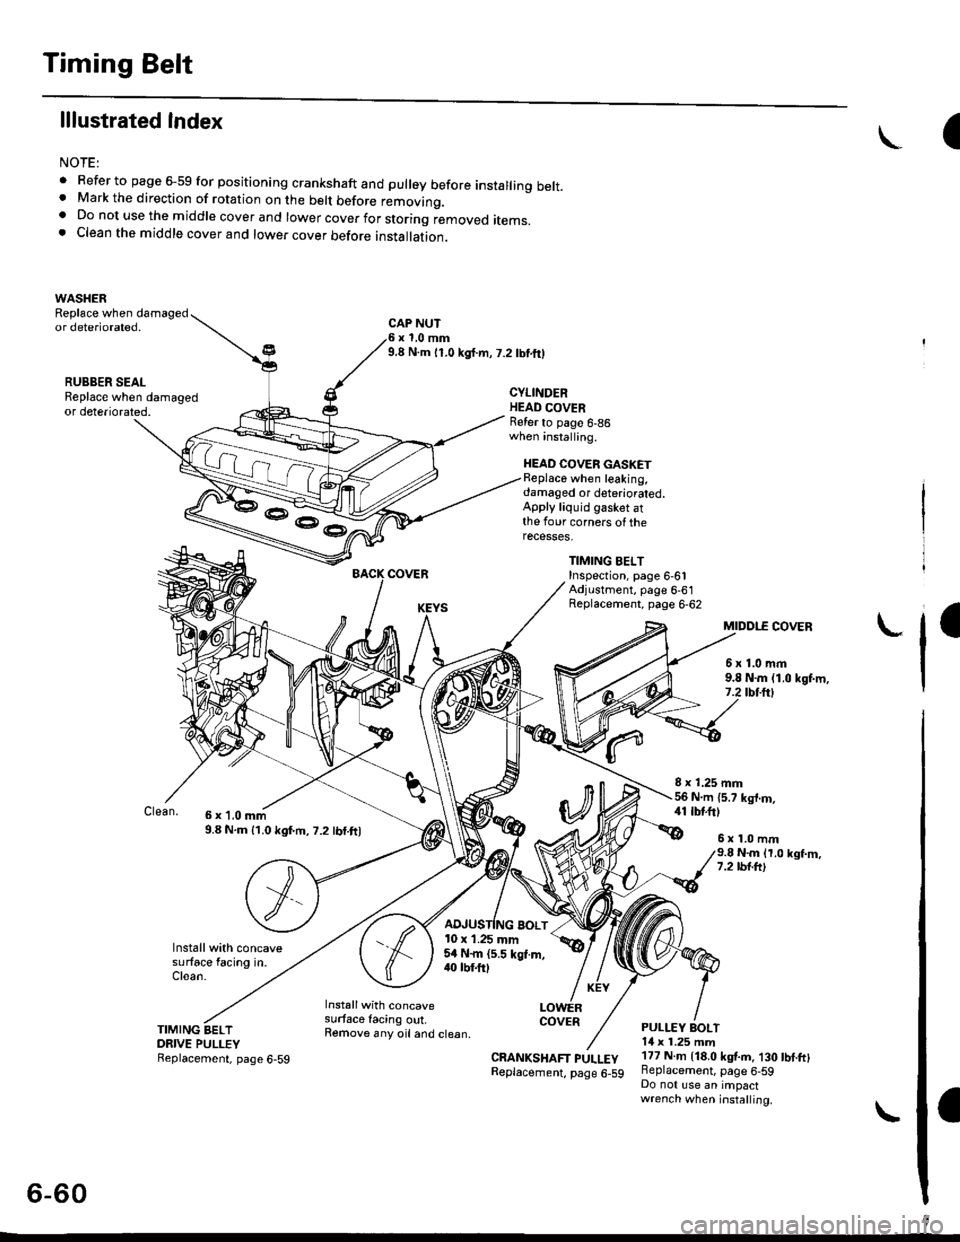 HONDA CIVIC 1996 6.G Workshop Manual Timing Belt
lllustrated Index
NOTE:
. Refer to page 6-59 for positioning crankshaft and pulley before installing belt.. Mark the direction of rotation on the belt before removino.a Do not use the midd